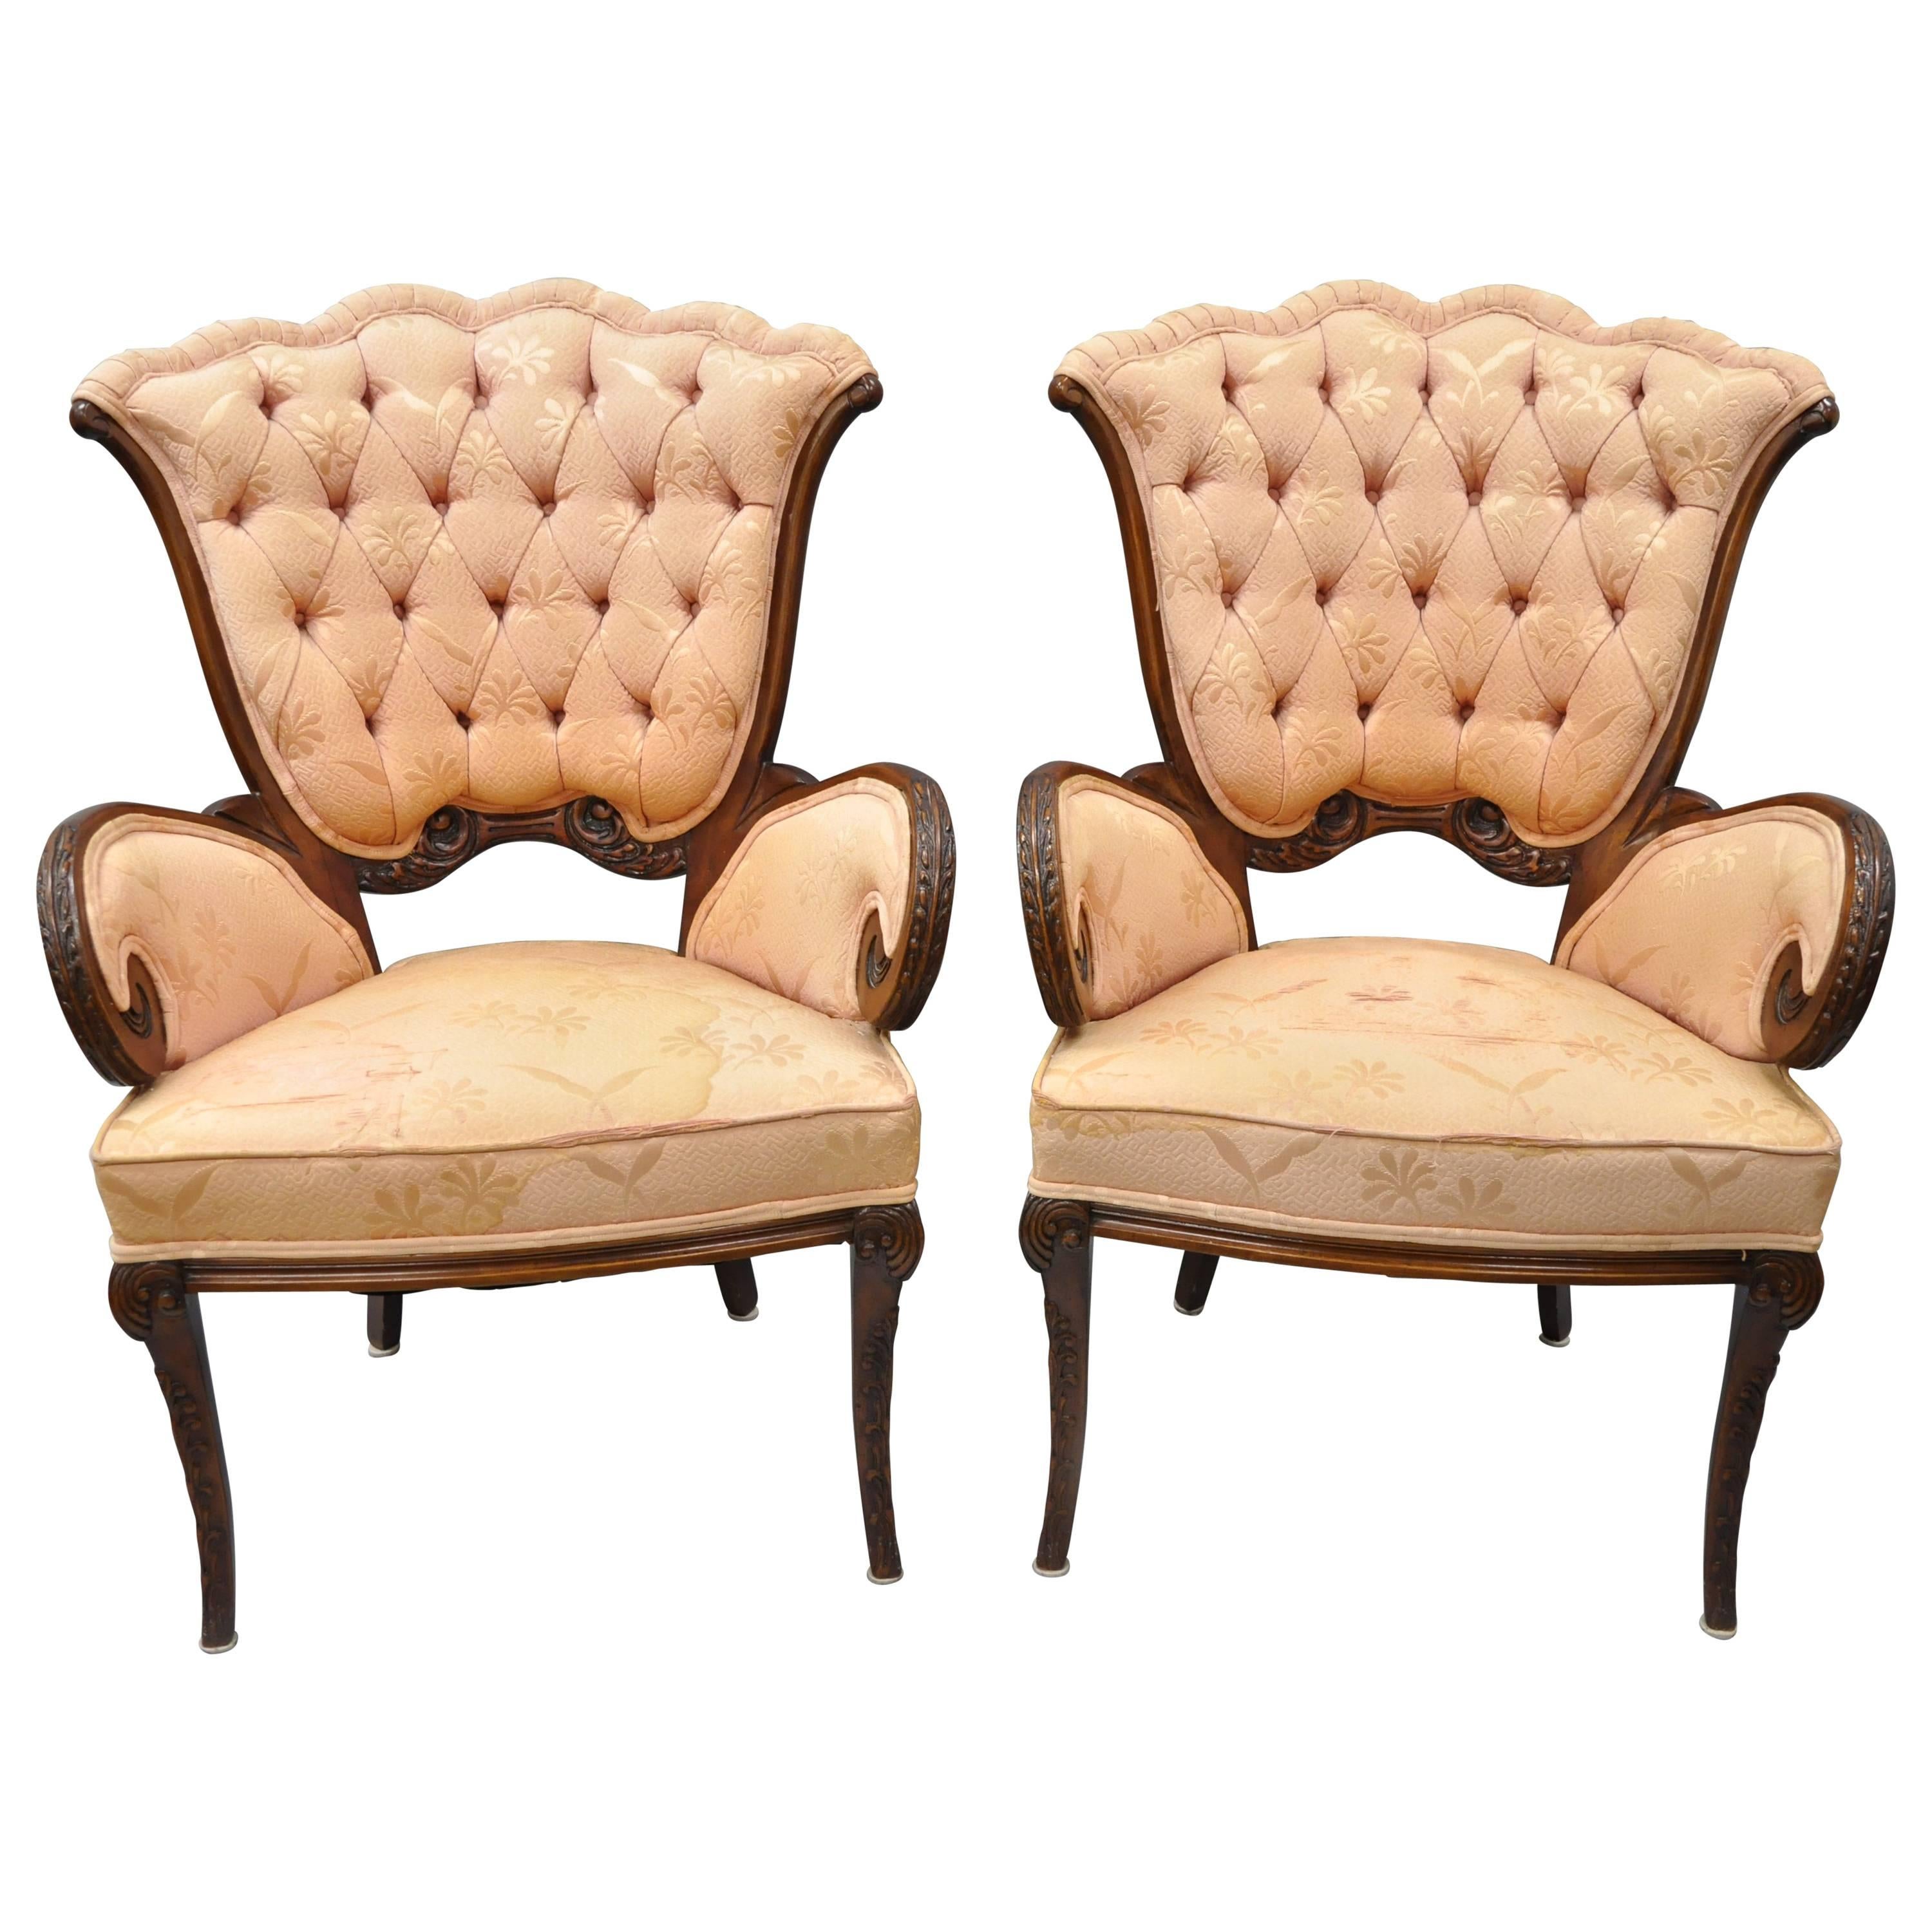 Pair of Mahogany Hollywood Regency Tufted Armchairs Attributed to Grosfeld House For Sale